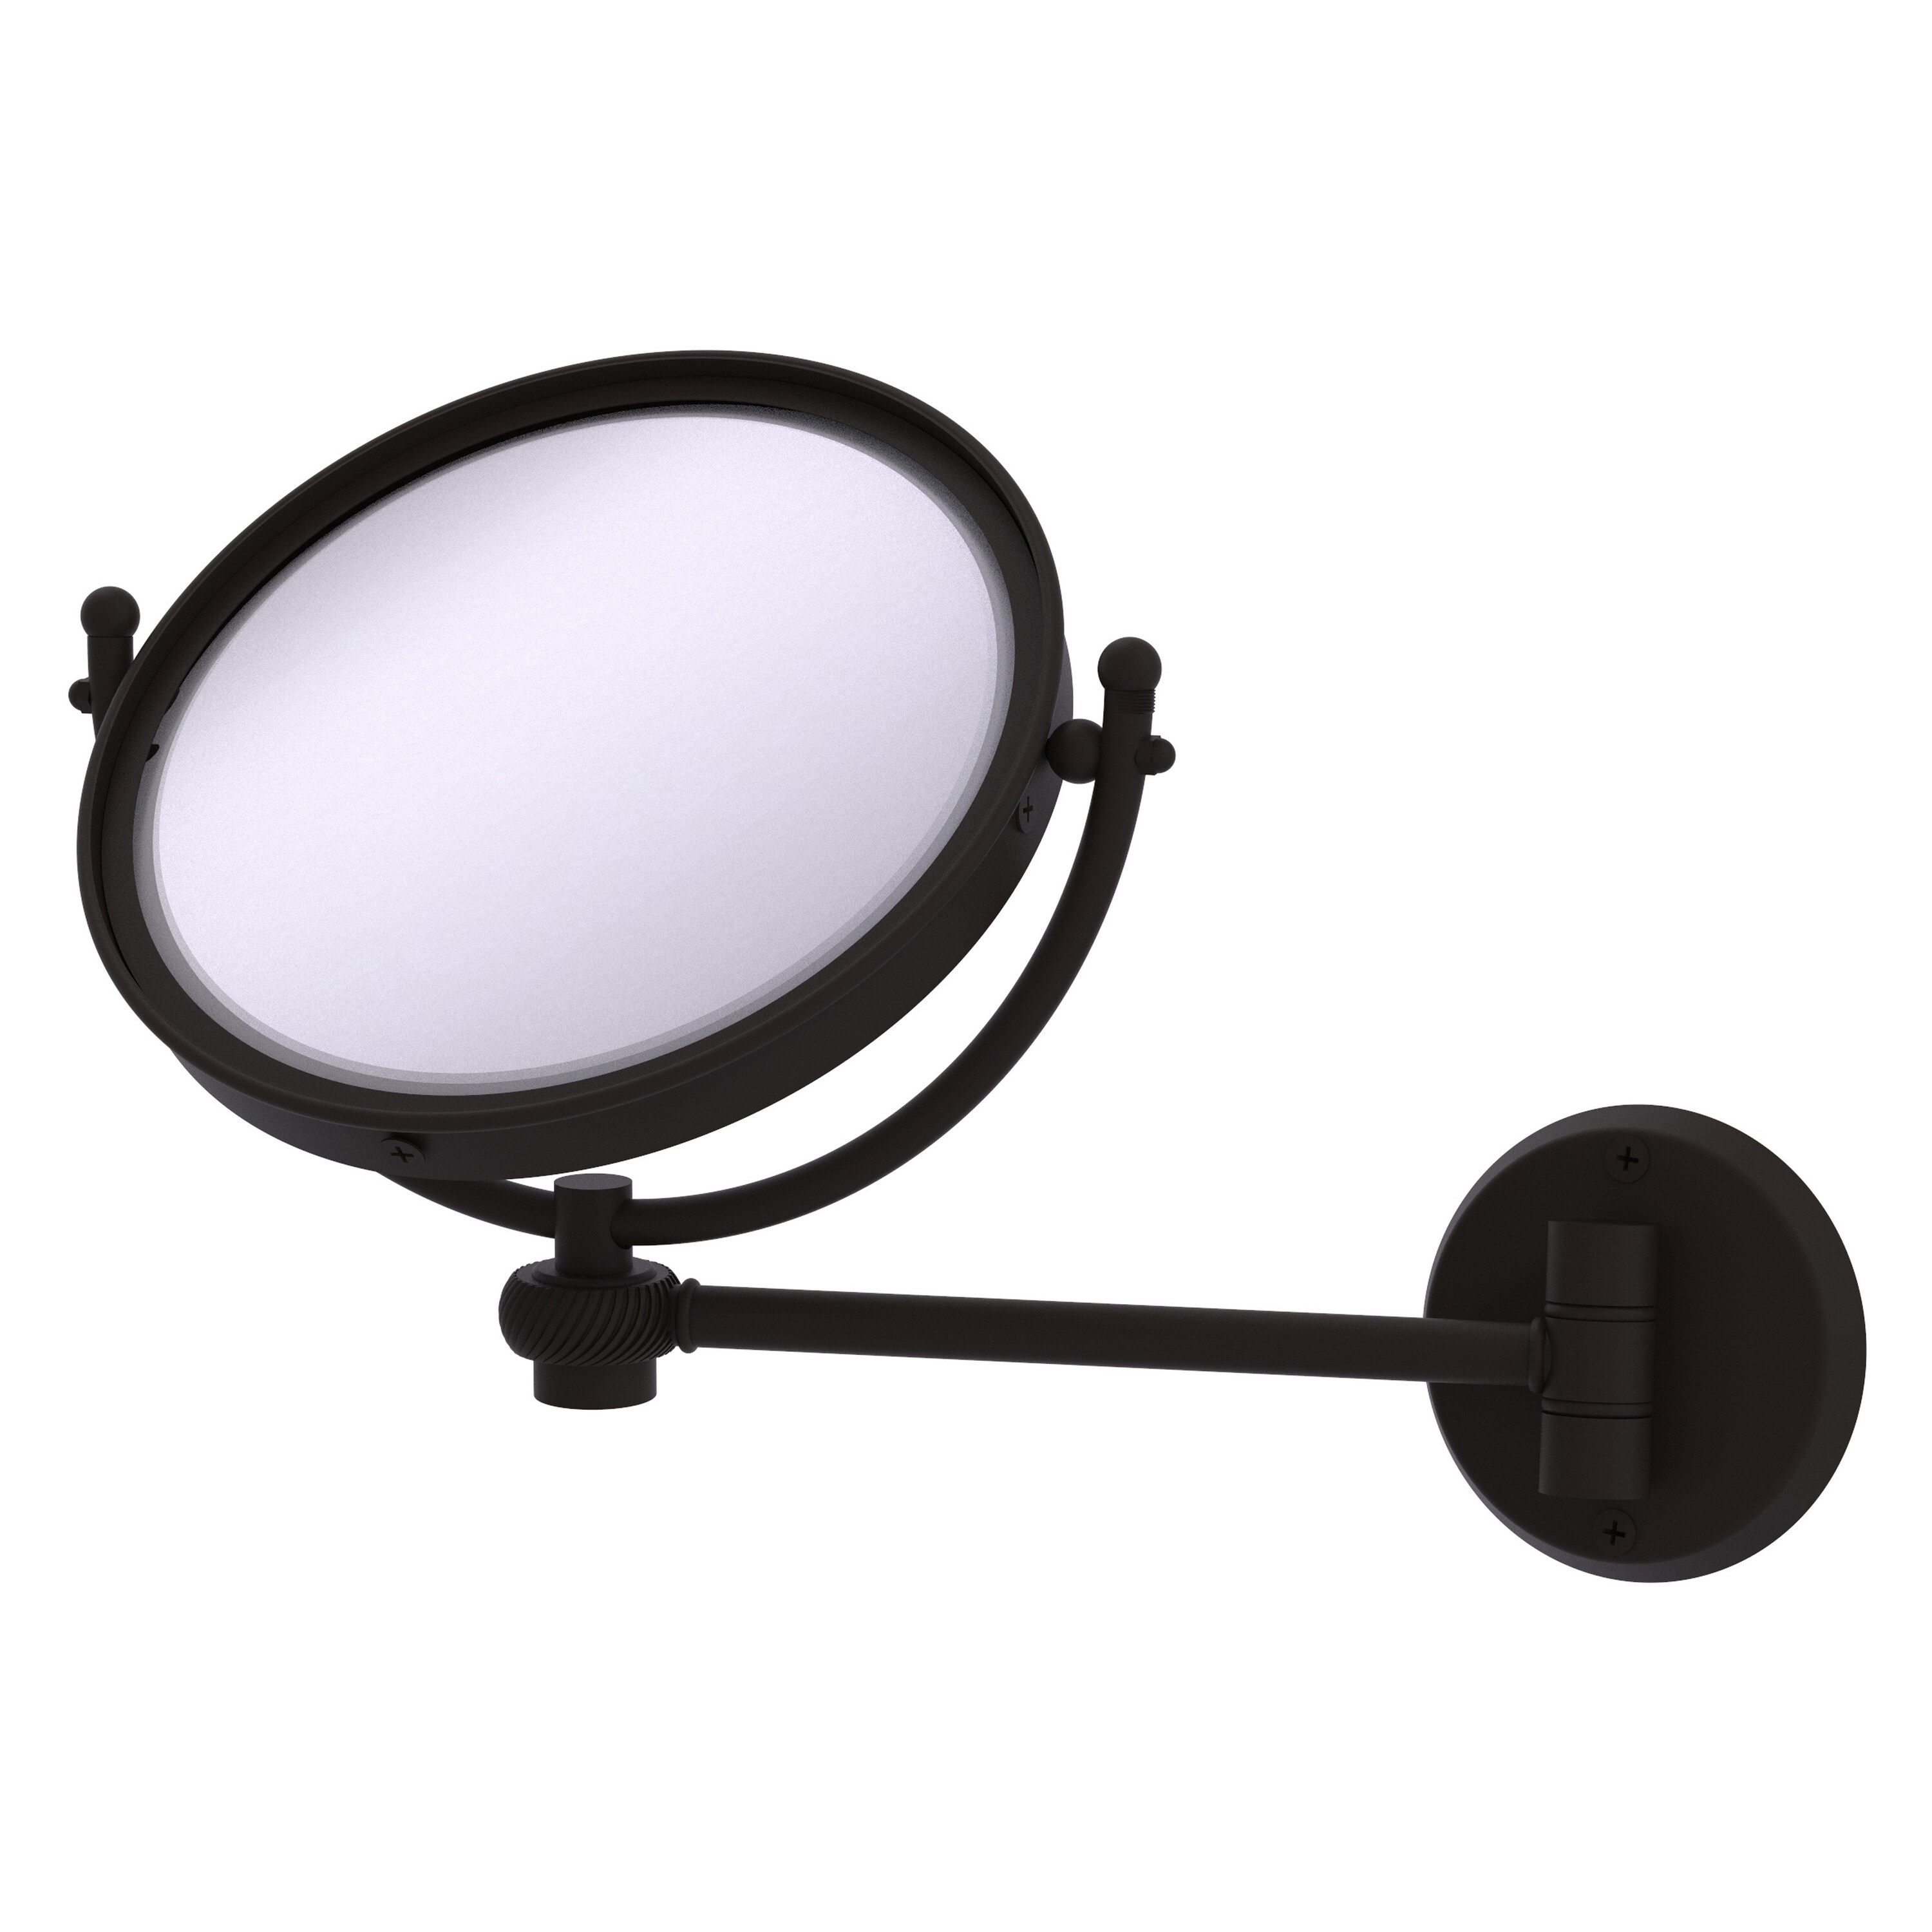 8-in x 10-in Oil-Rubbed Chrome Double-sided 2X Magnifying Wall-mounted Vanity Mirror | - Allied Brass WM-5T/2X-ORB